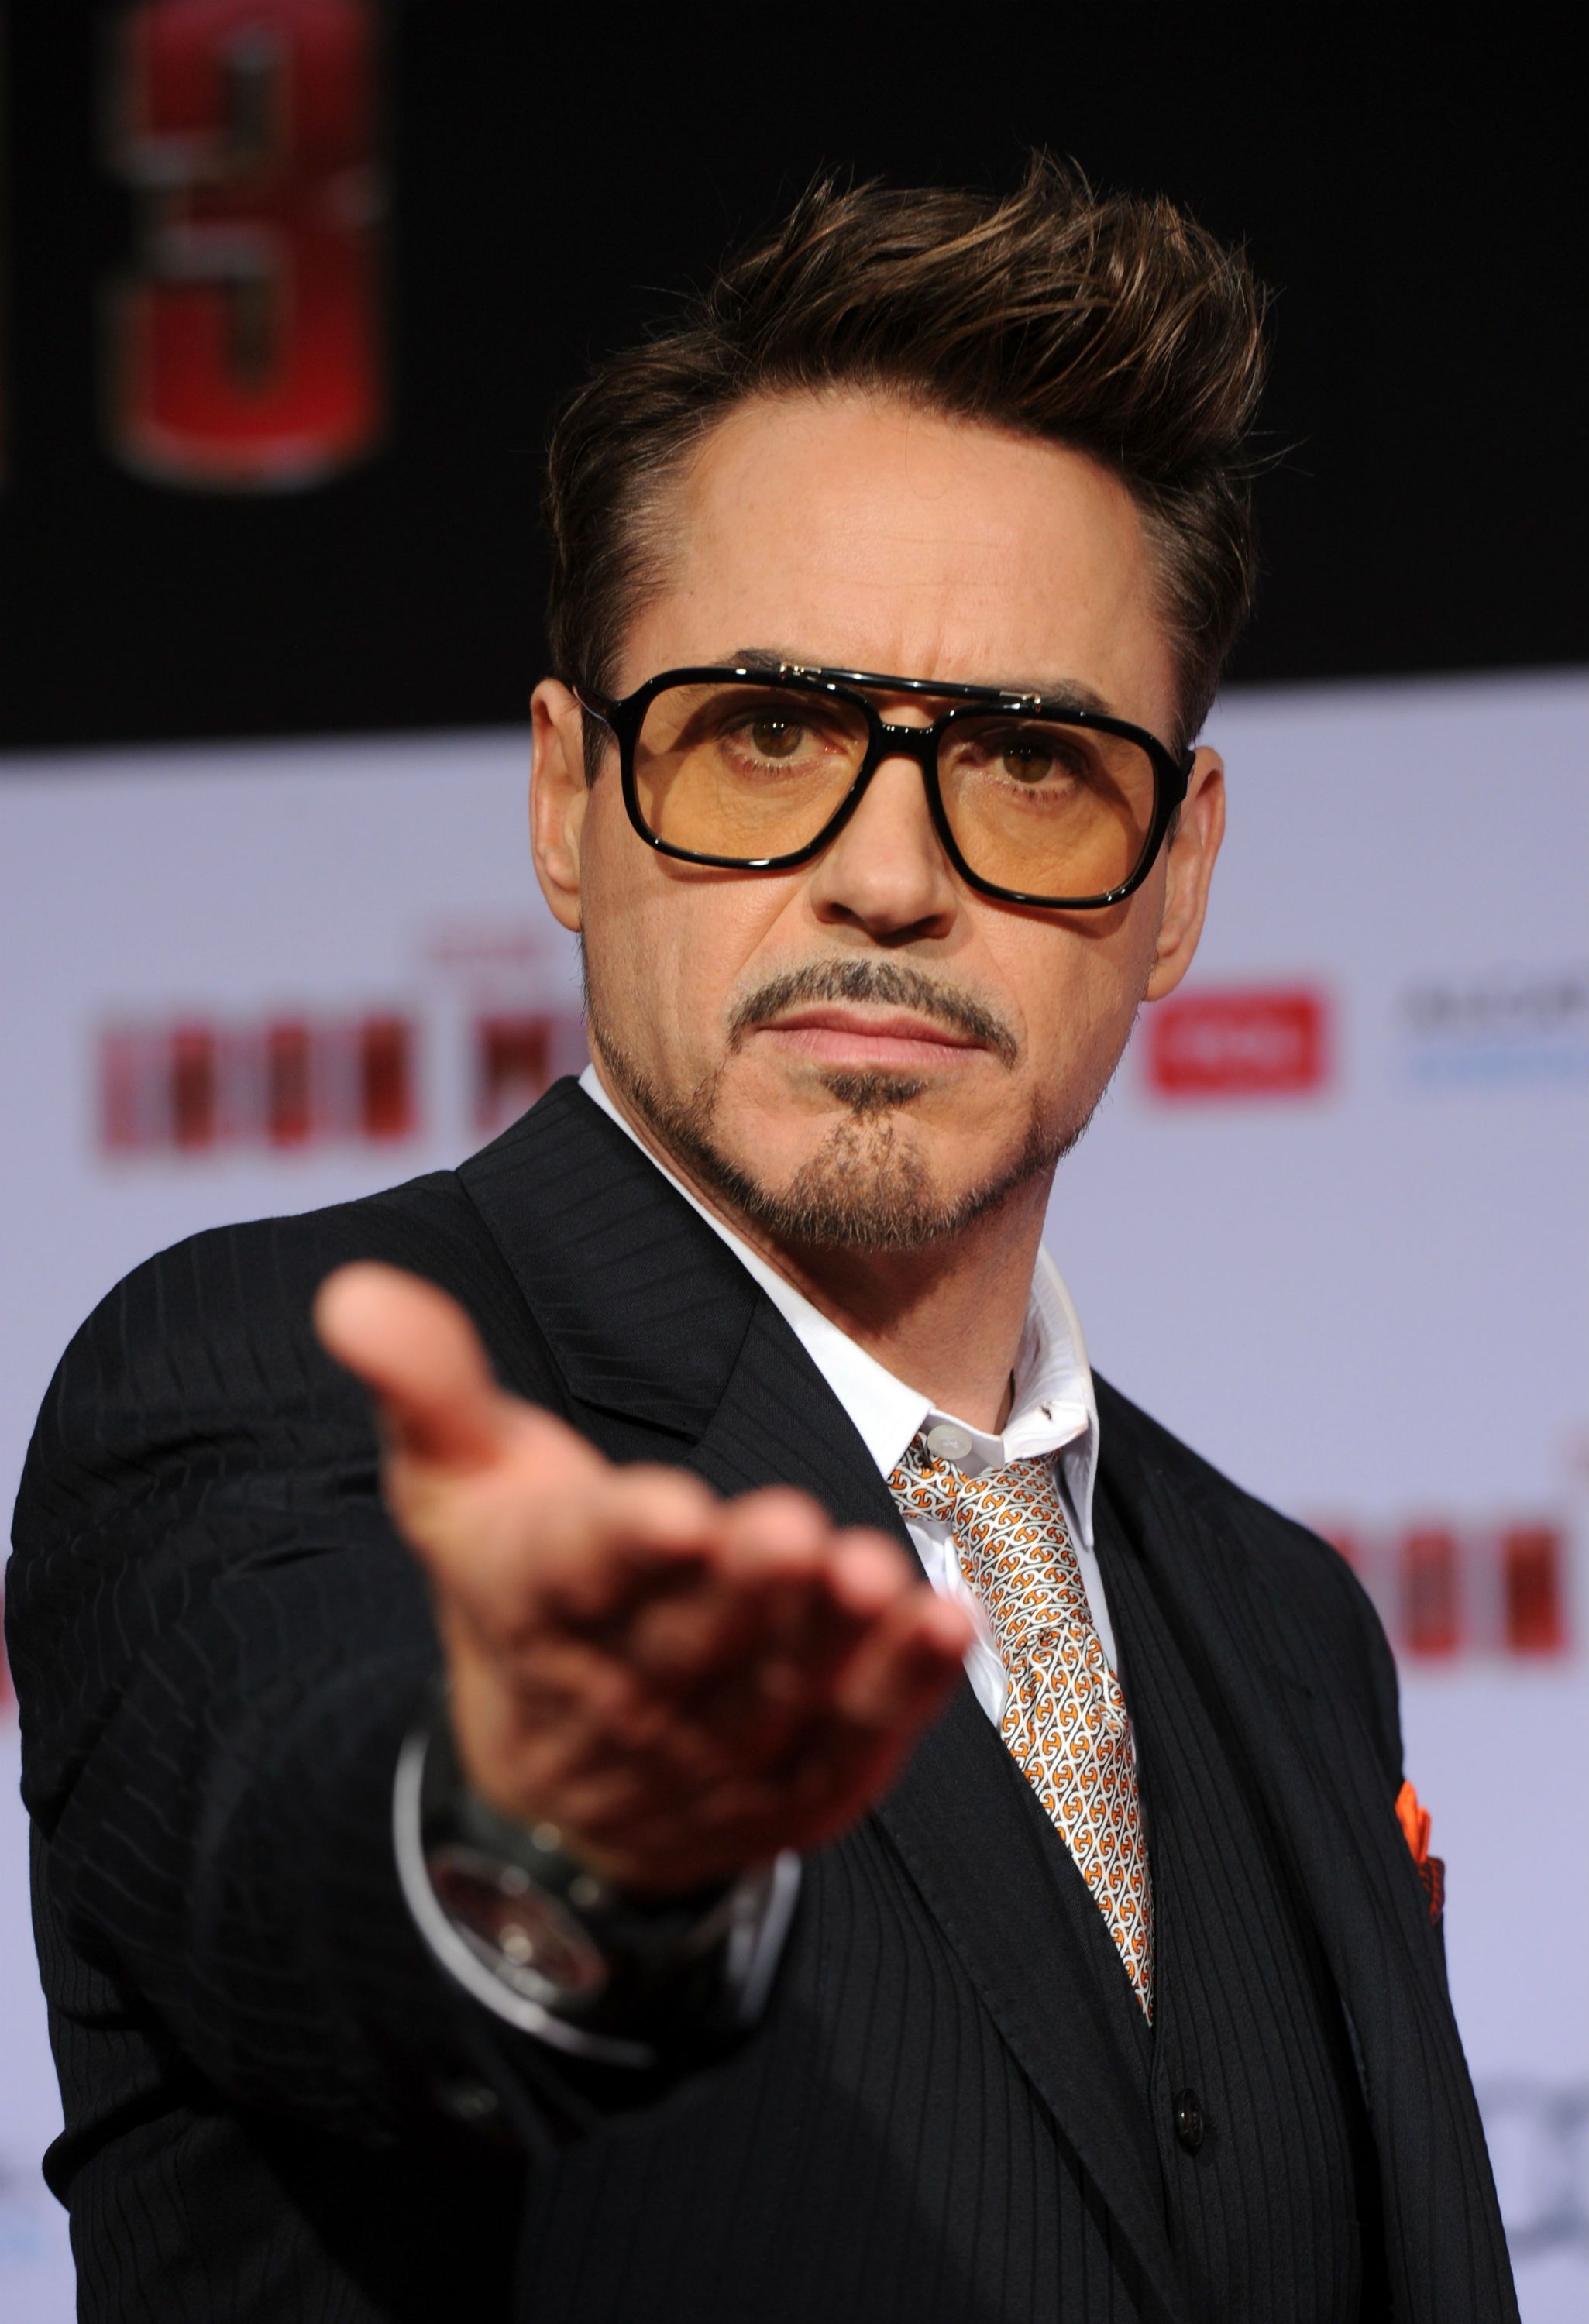 Robert Downey Jr fans shocked as actor is unrecognisable with new look   Mirror Online